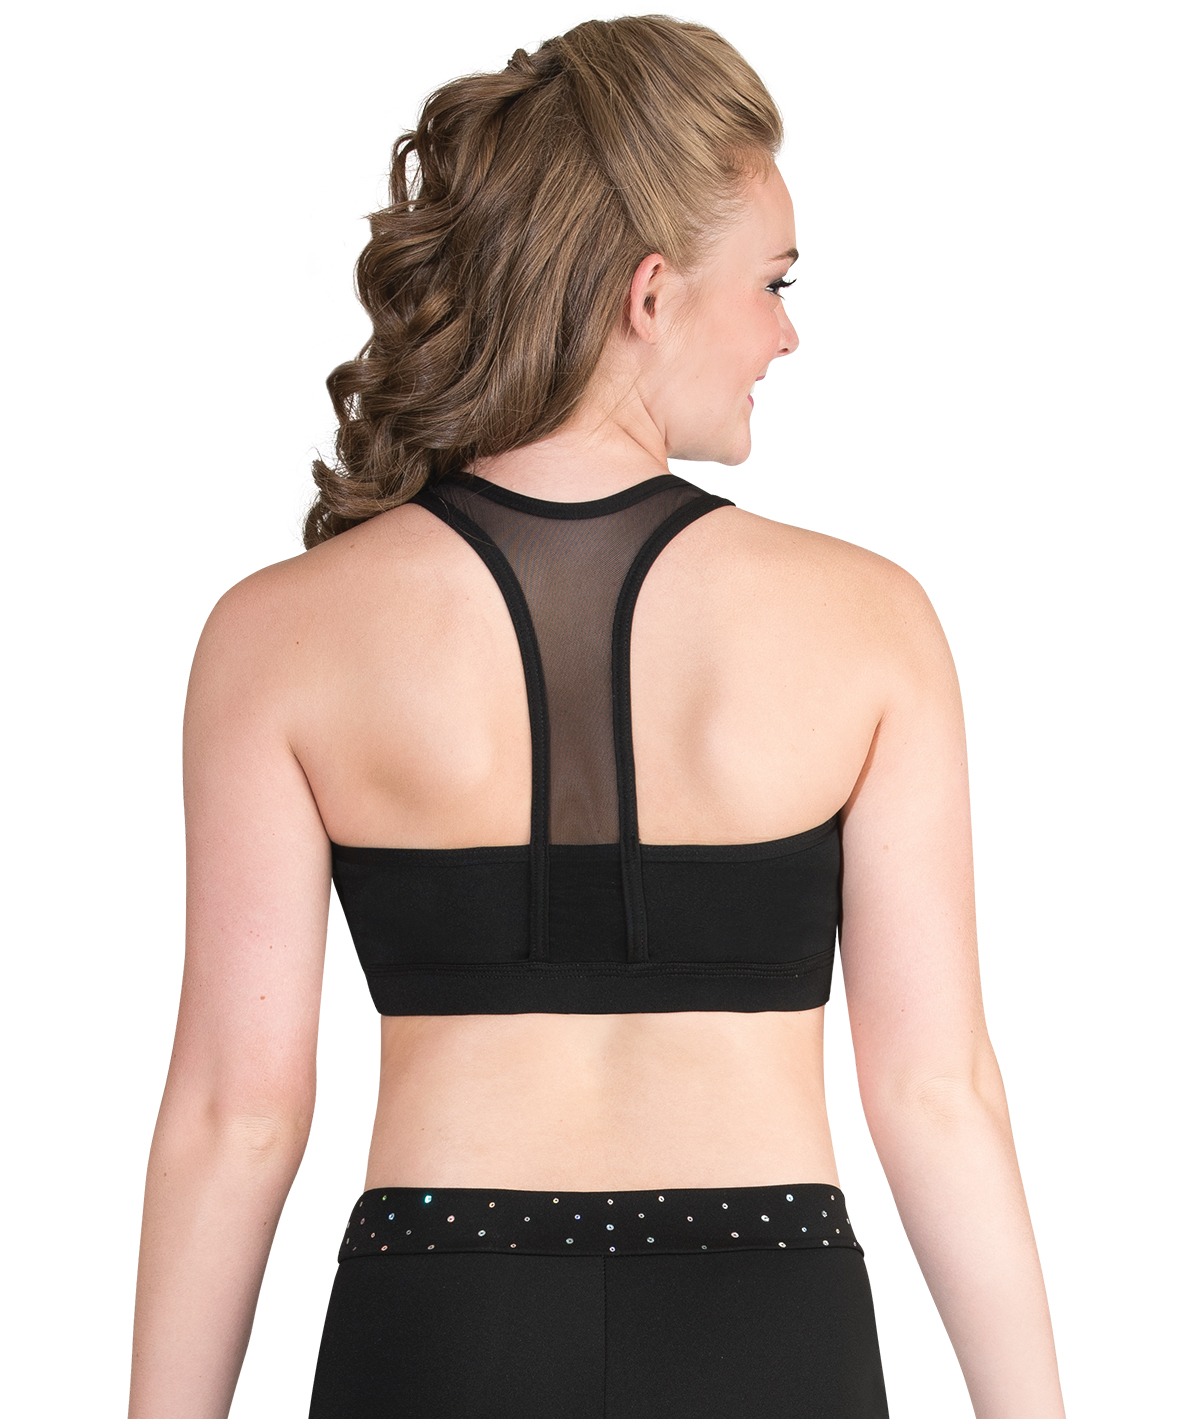 GK All Star In Motion Cheer Crop Top